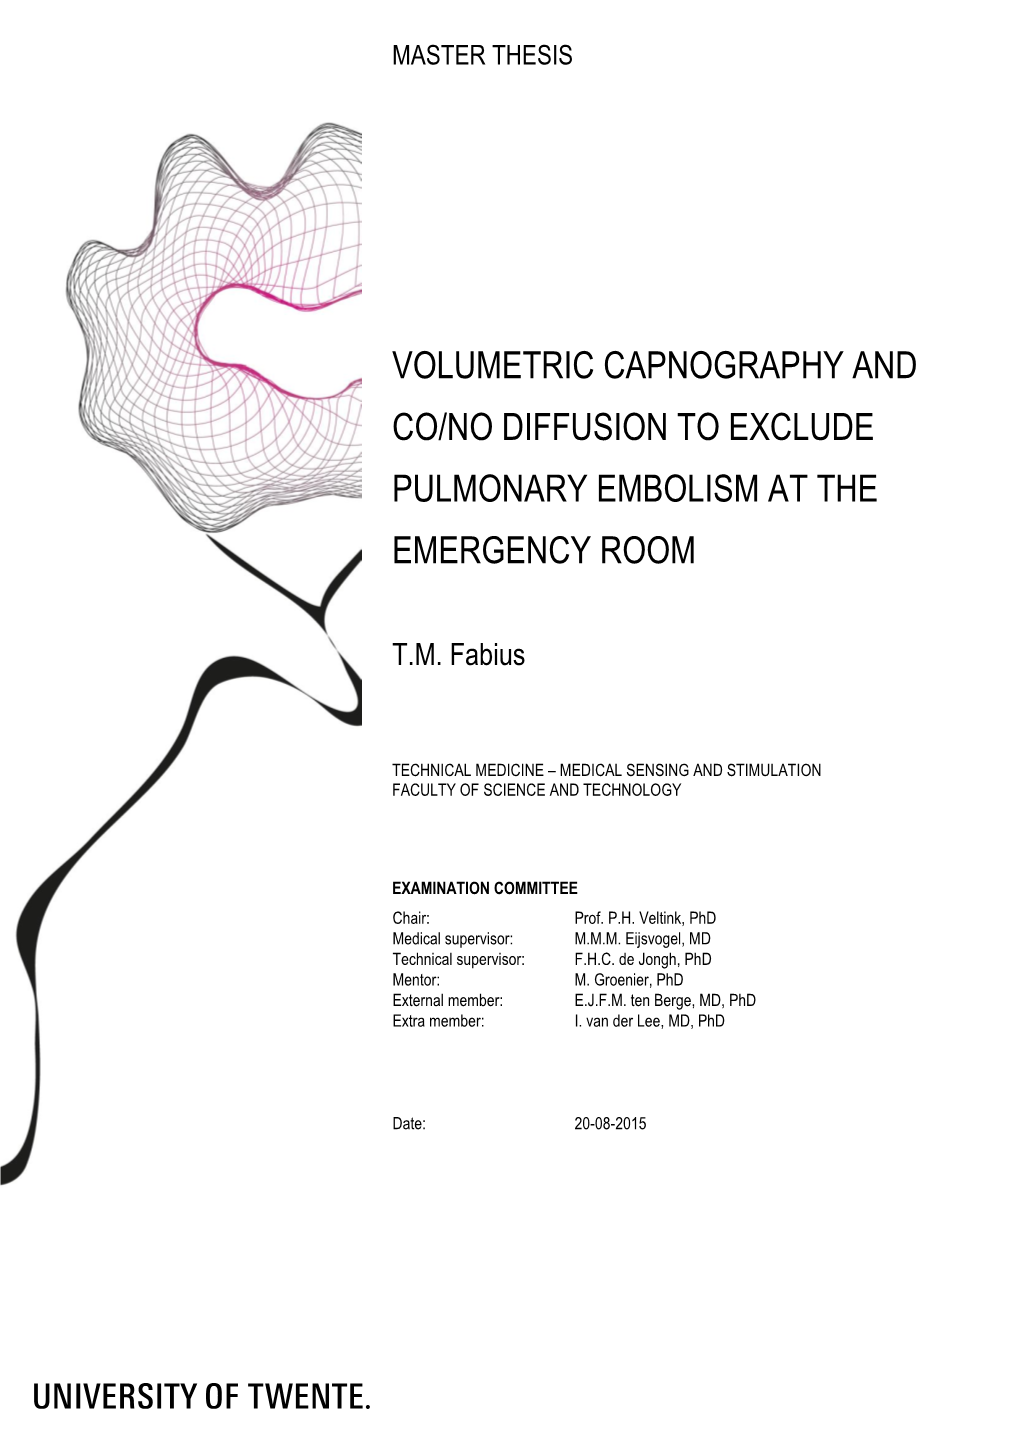 Volumetric Capnography and Co/No Diffusion to Exclude Pulmonary Embolism at the Emergency Room